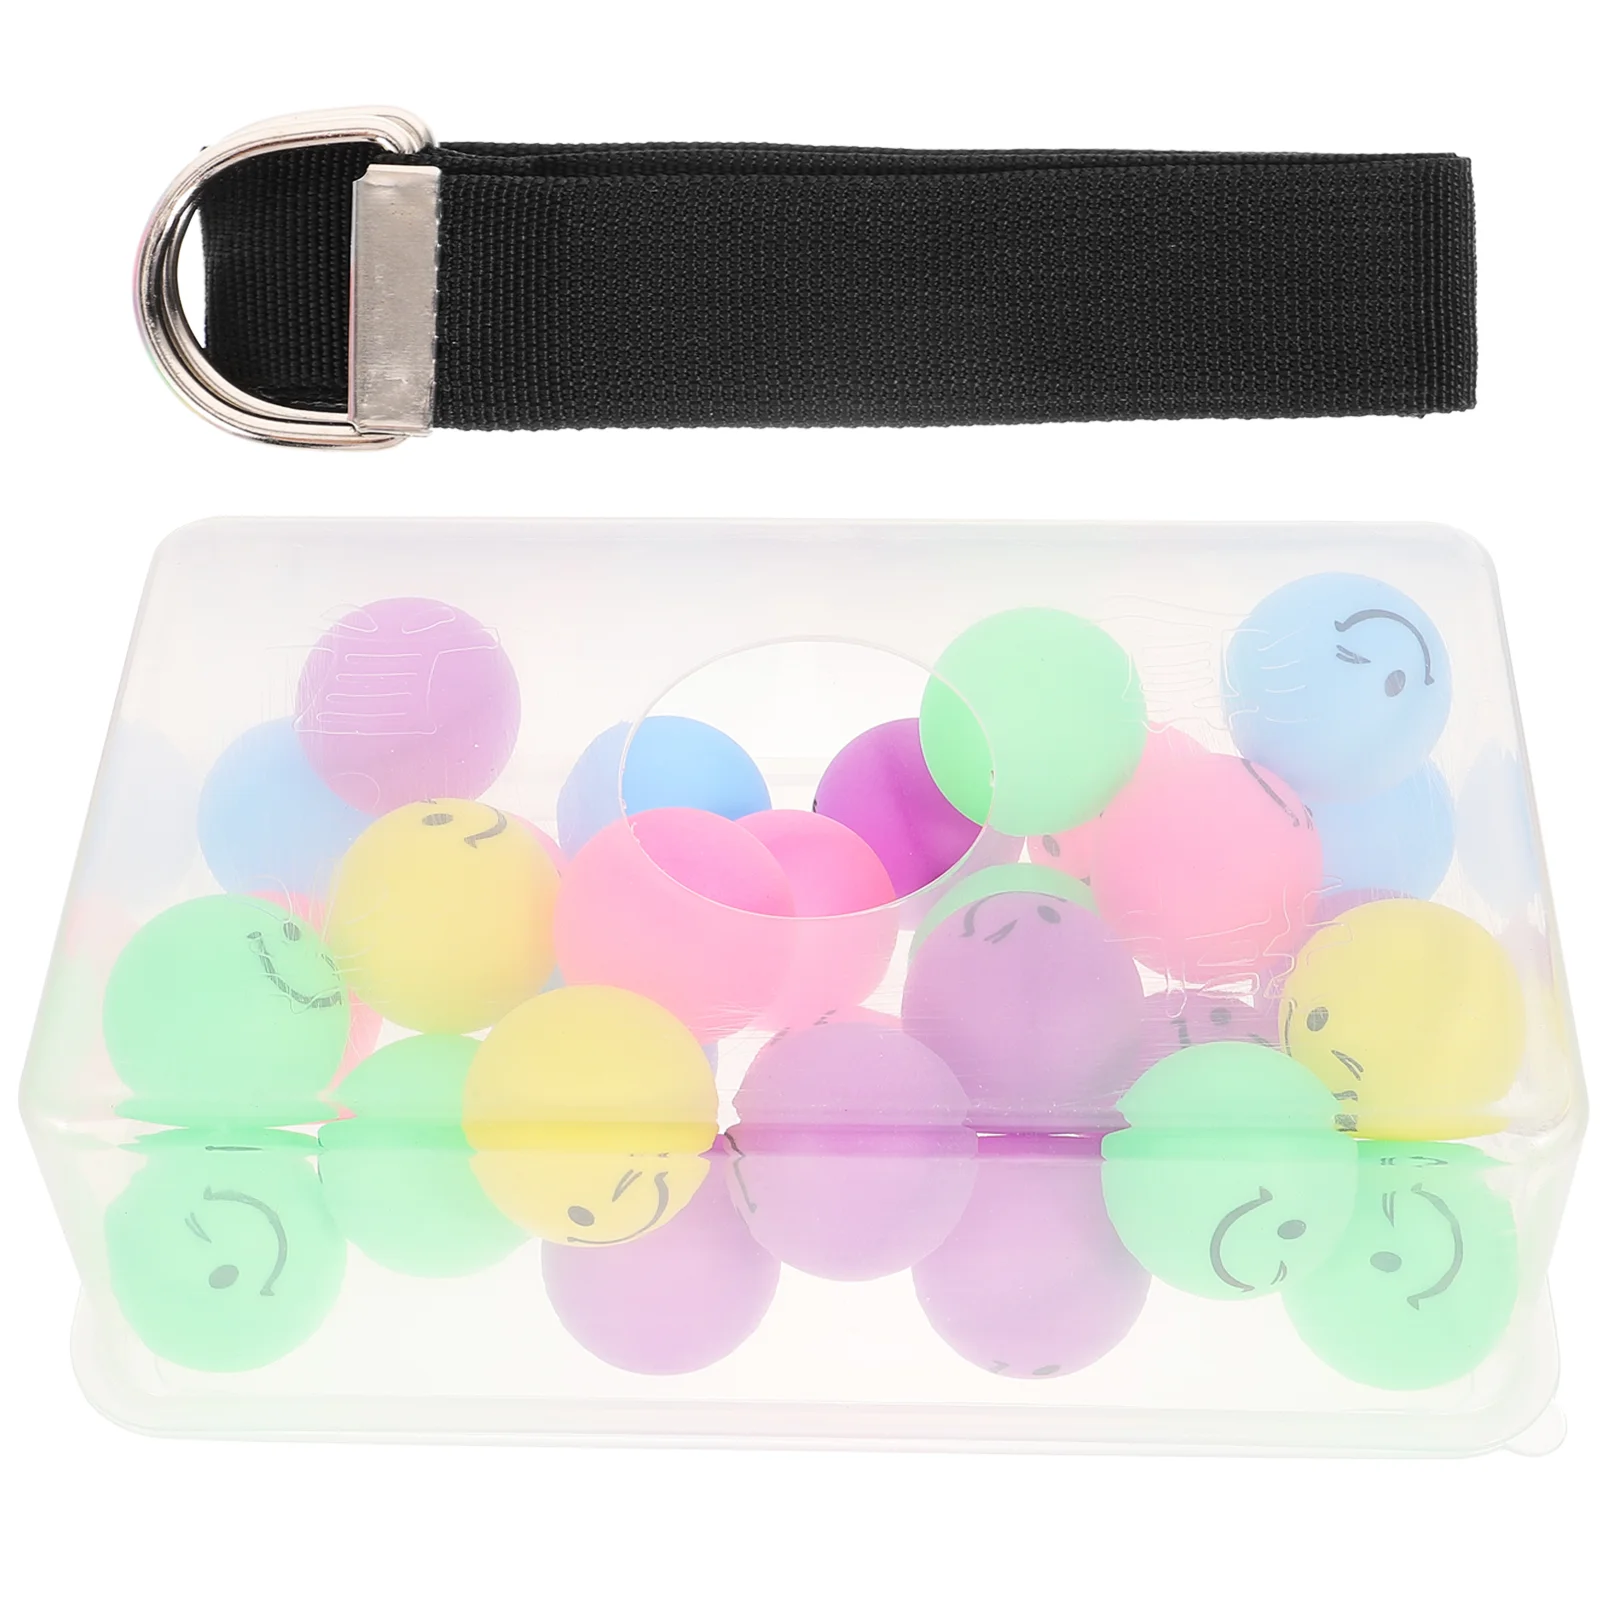 

Parent-child Interaction Toys Sashes Balls Shaking Game Kit Stress Reliever Funny Pvc Cognitive Plaything Kids Plastic